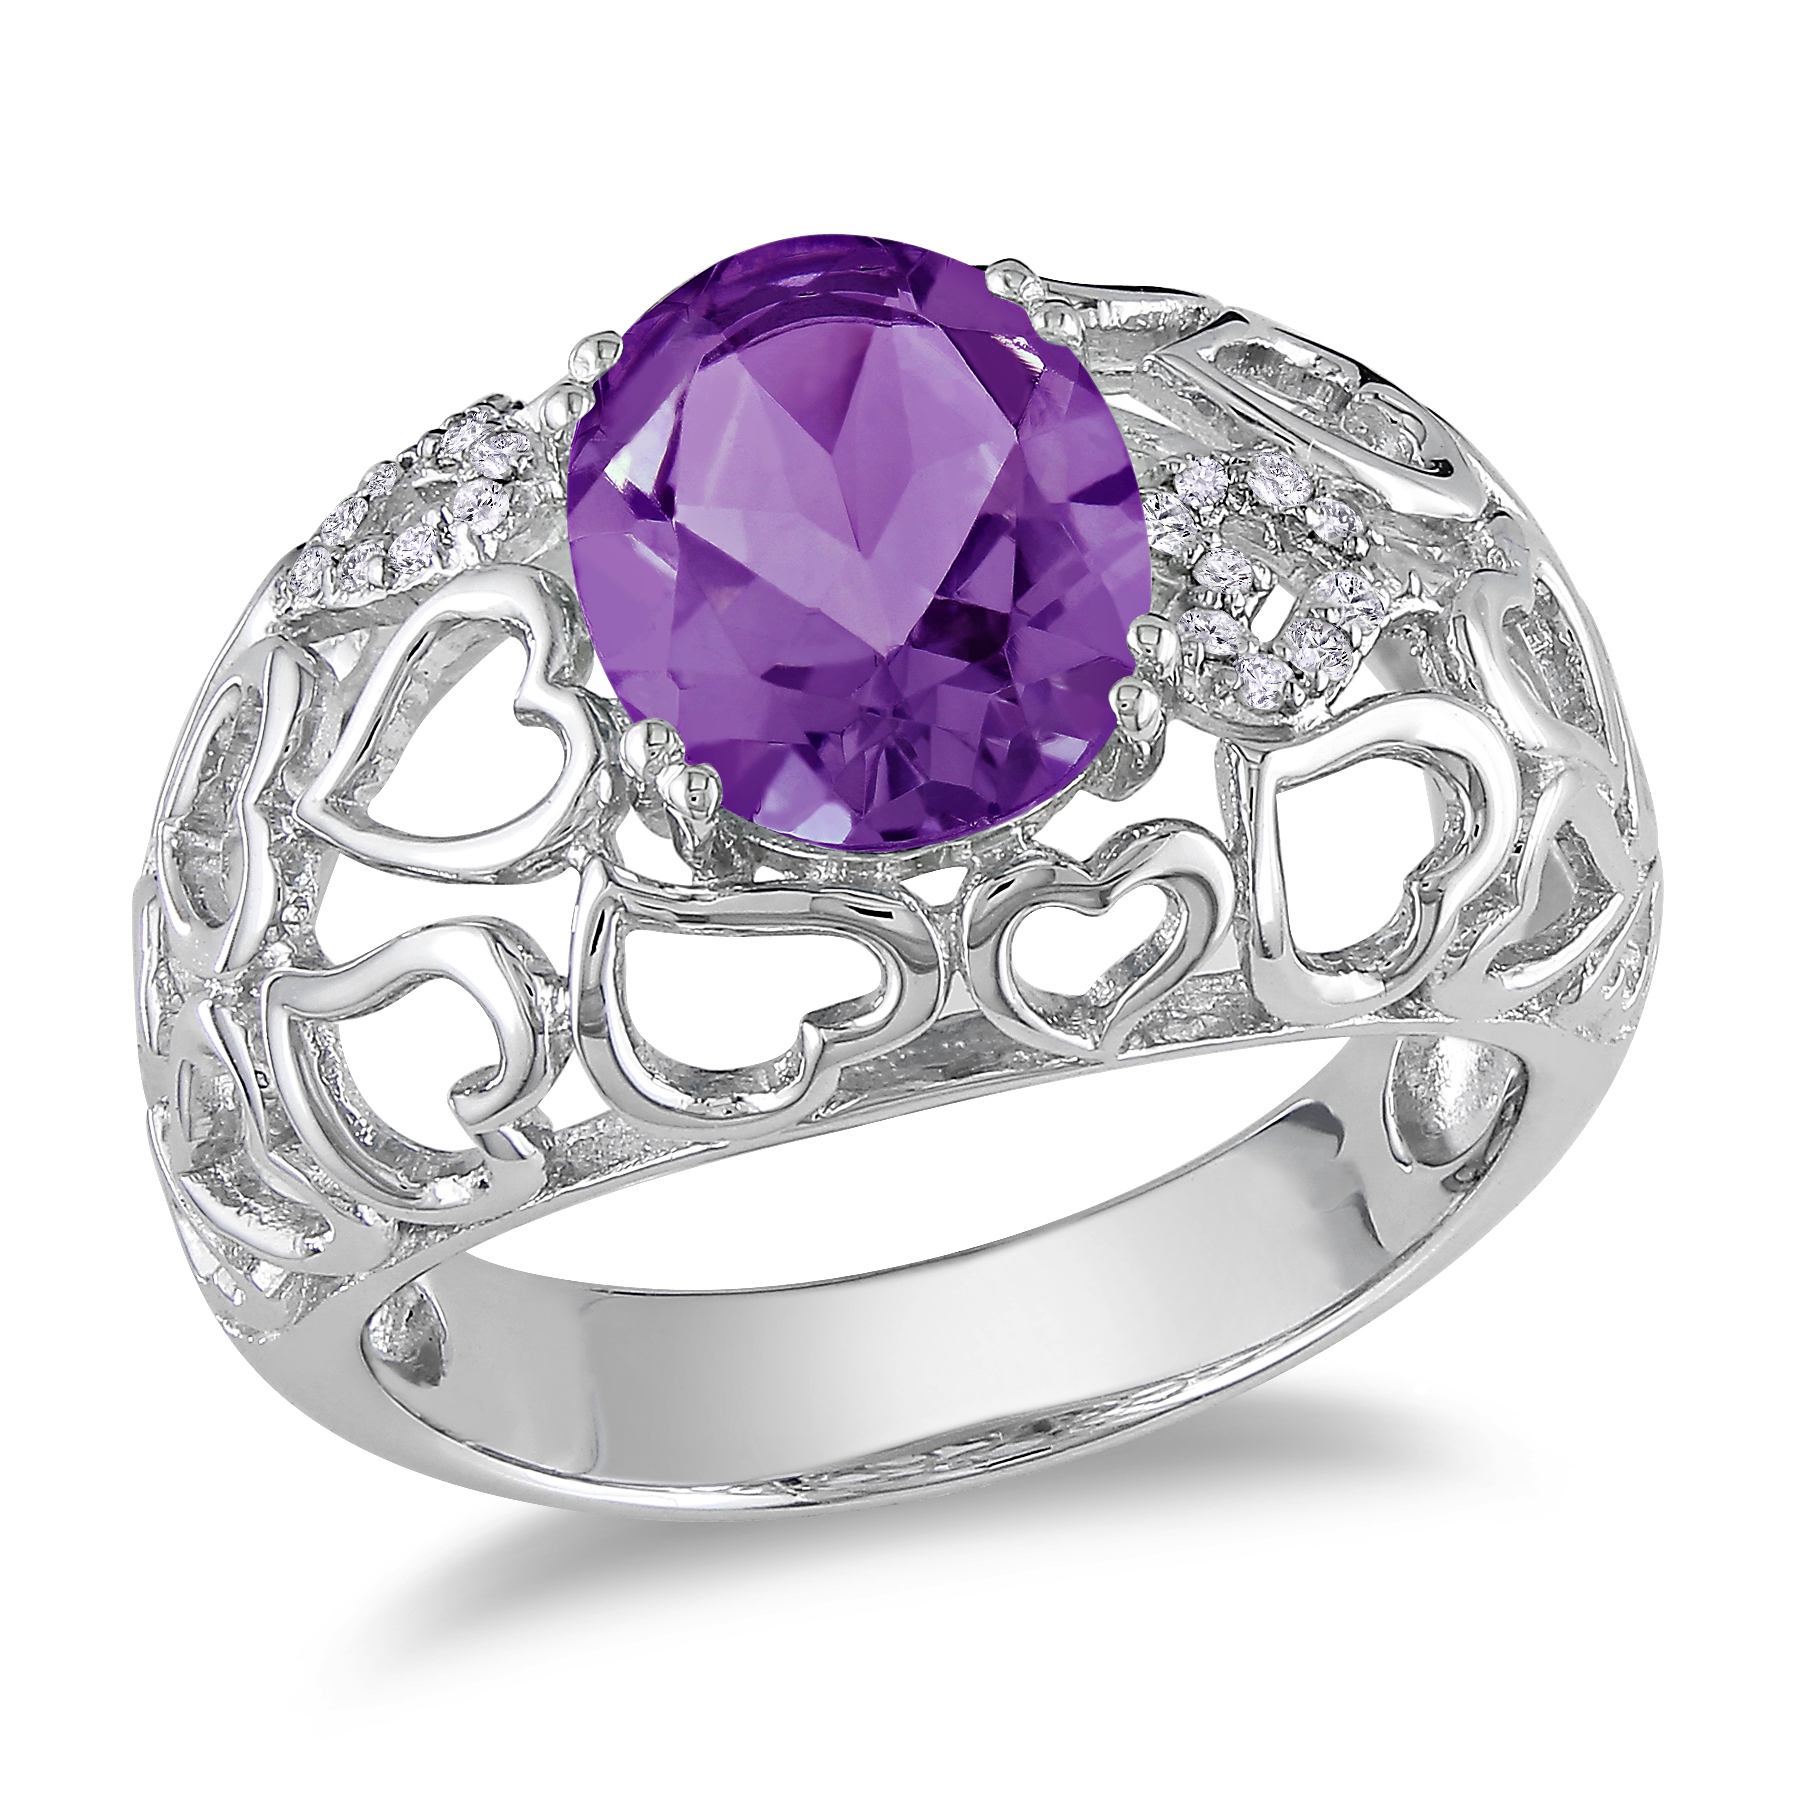 Amour 0.06 Carat T.W. Diamond and 2 3/8 Carat T.G.W. Amethyst Fashion Ring in Sterling Silver GH I3